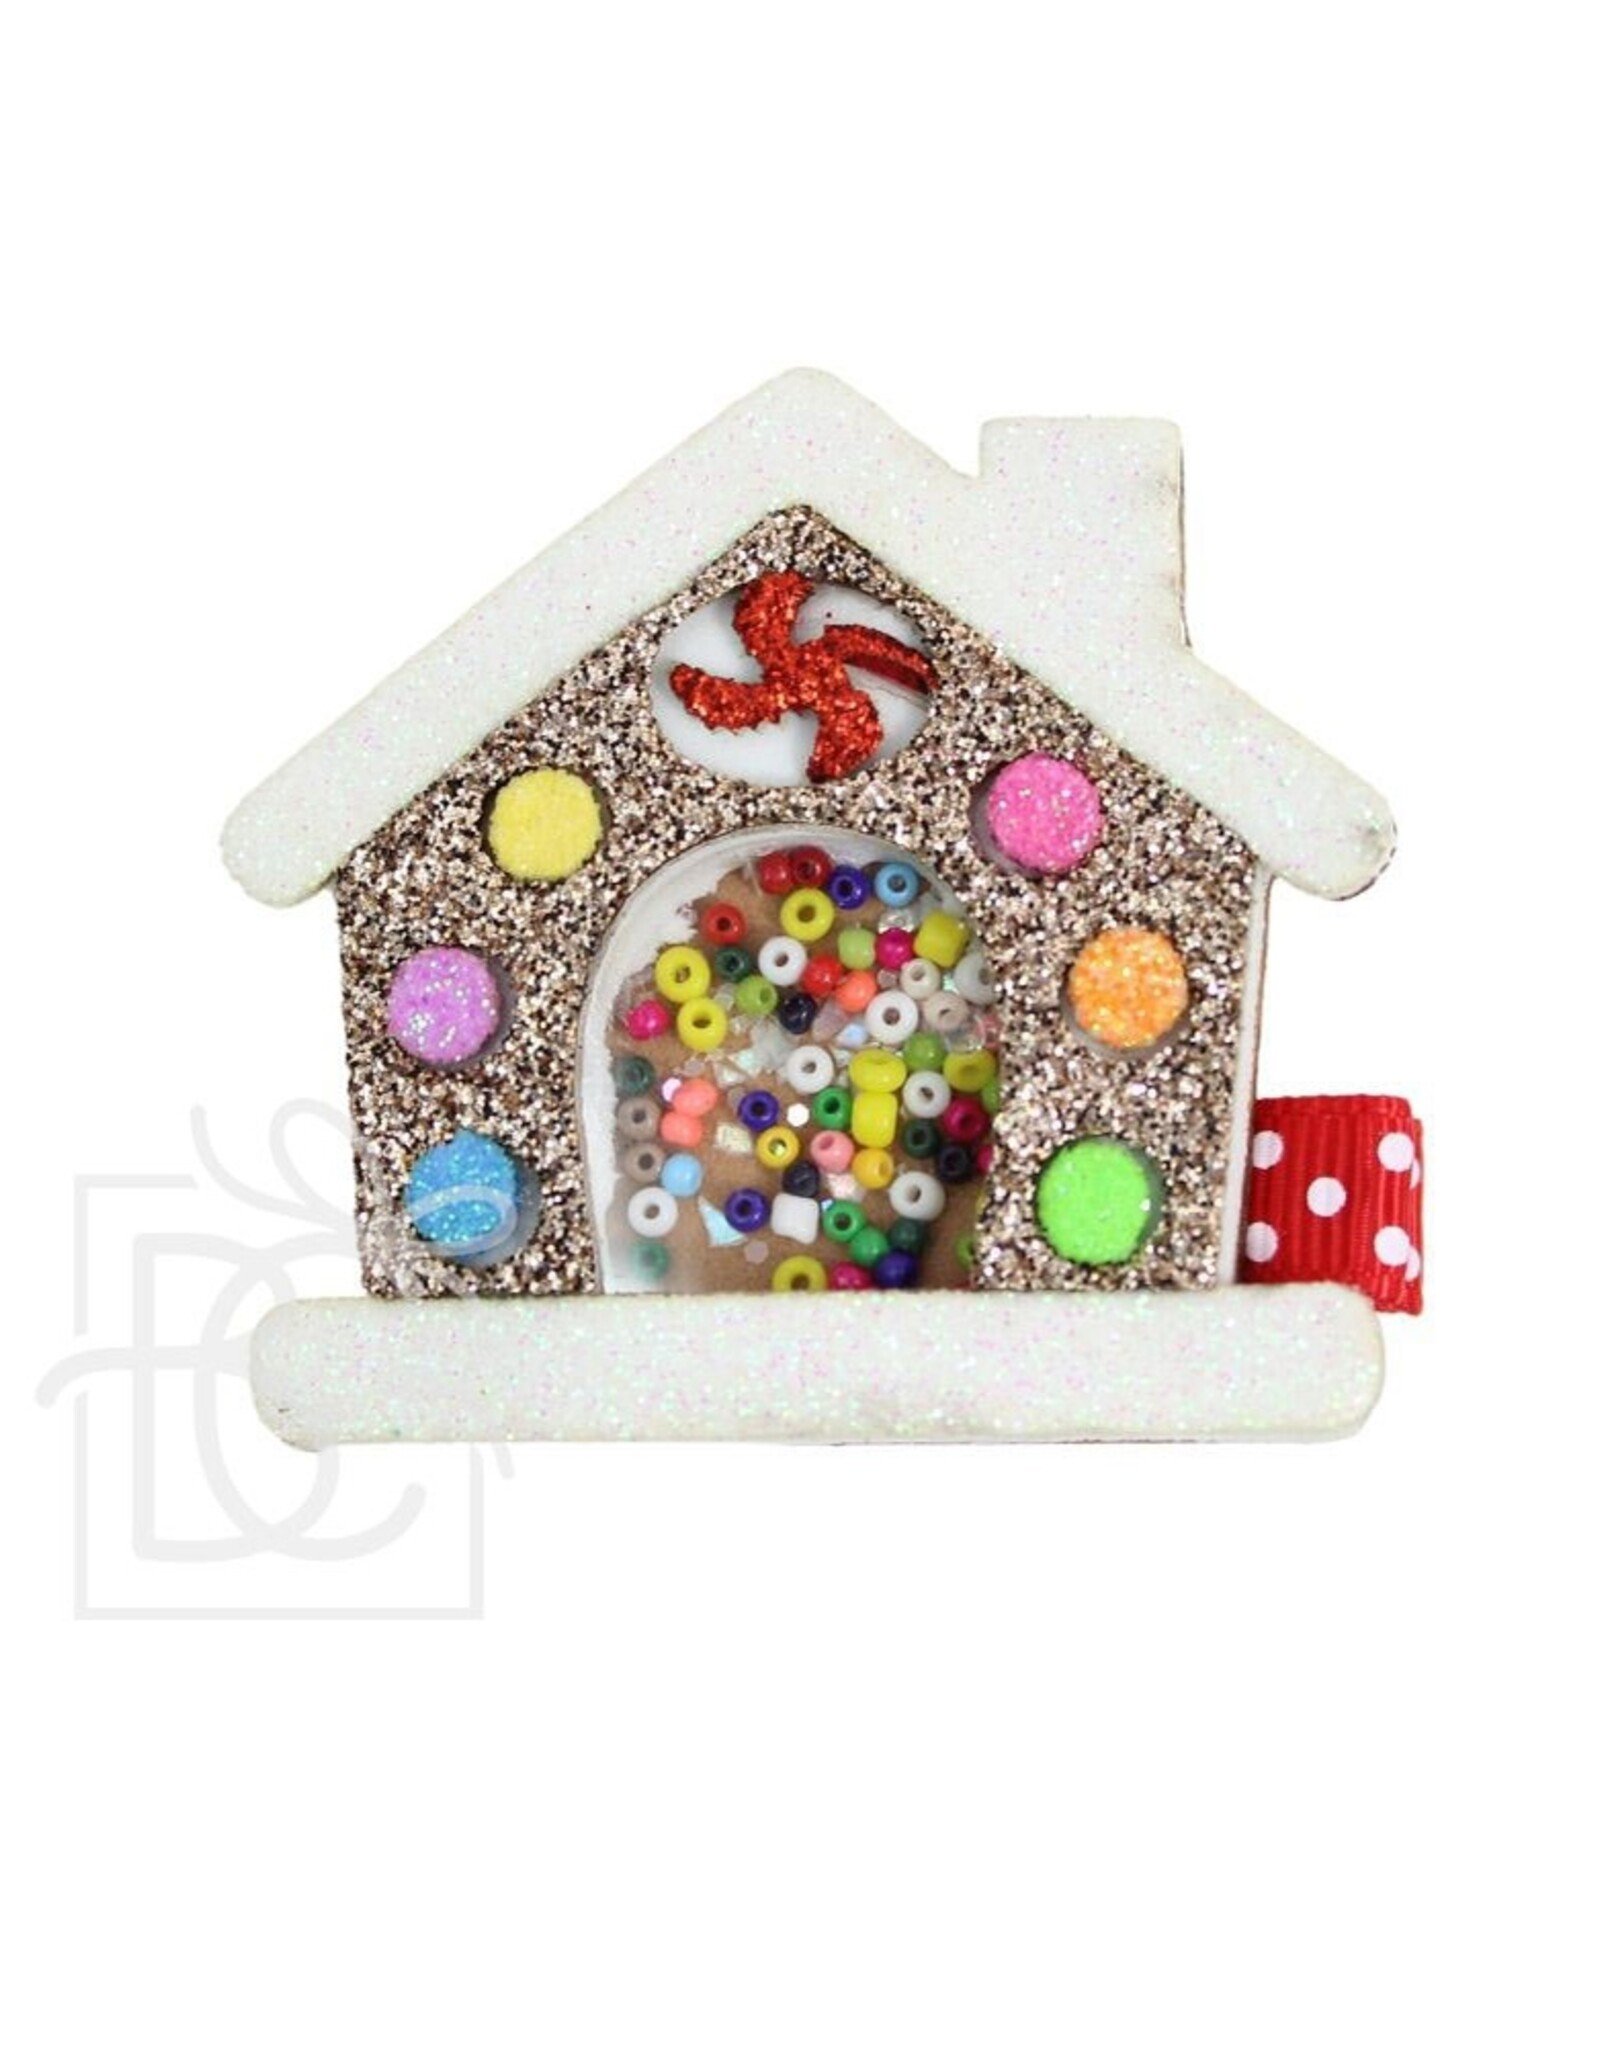 Beyond Creations Shaker Bow Gingerbread House